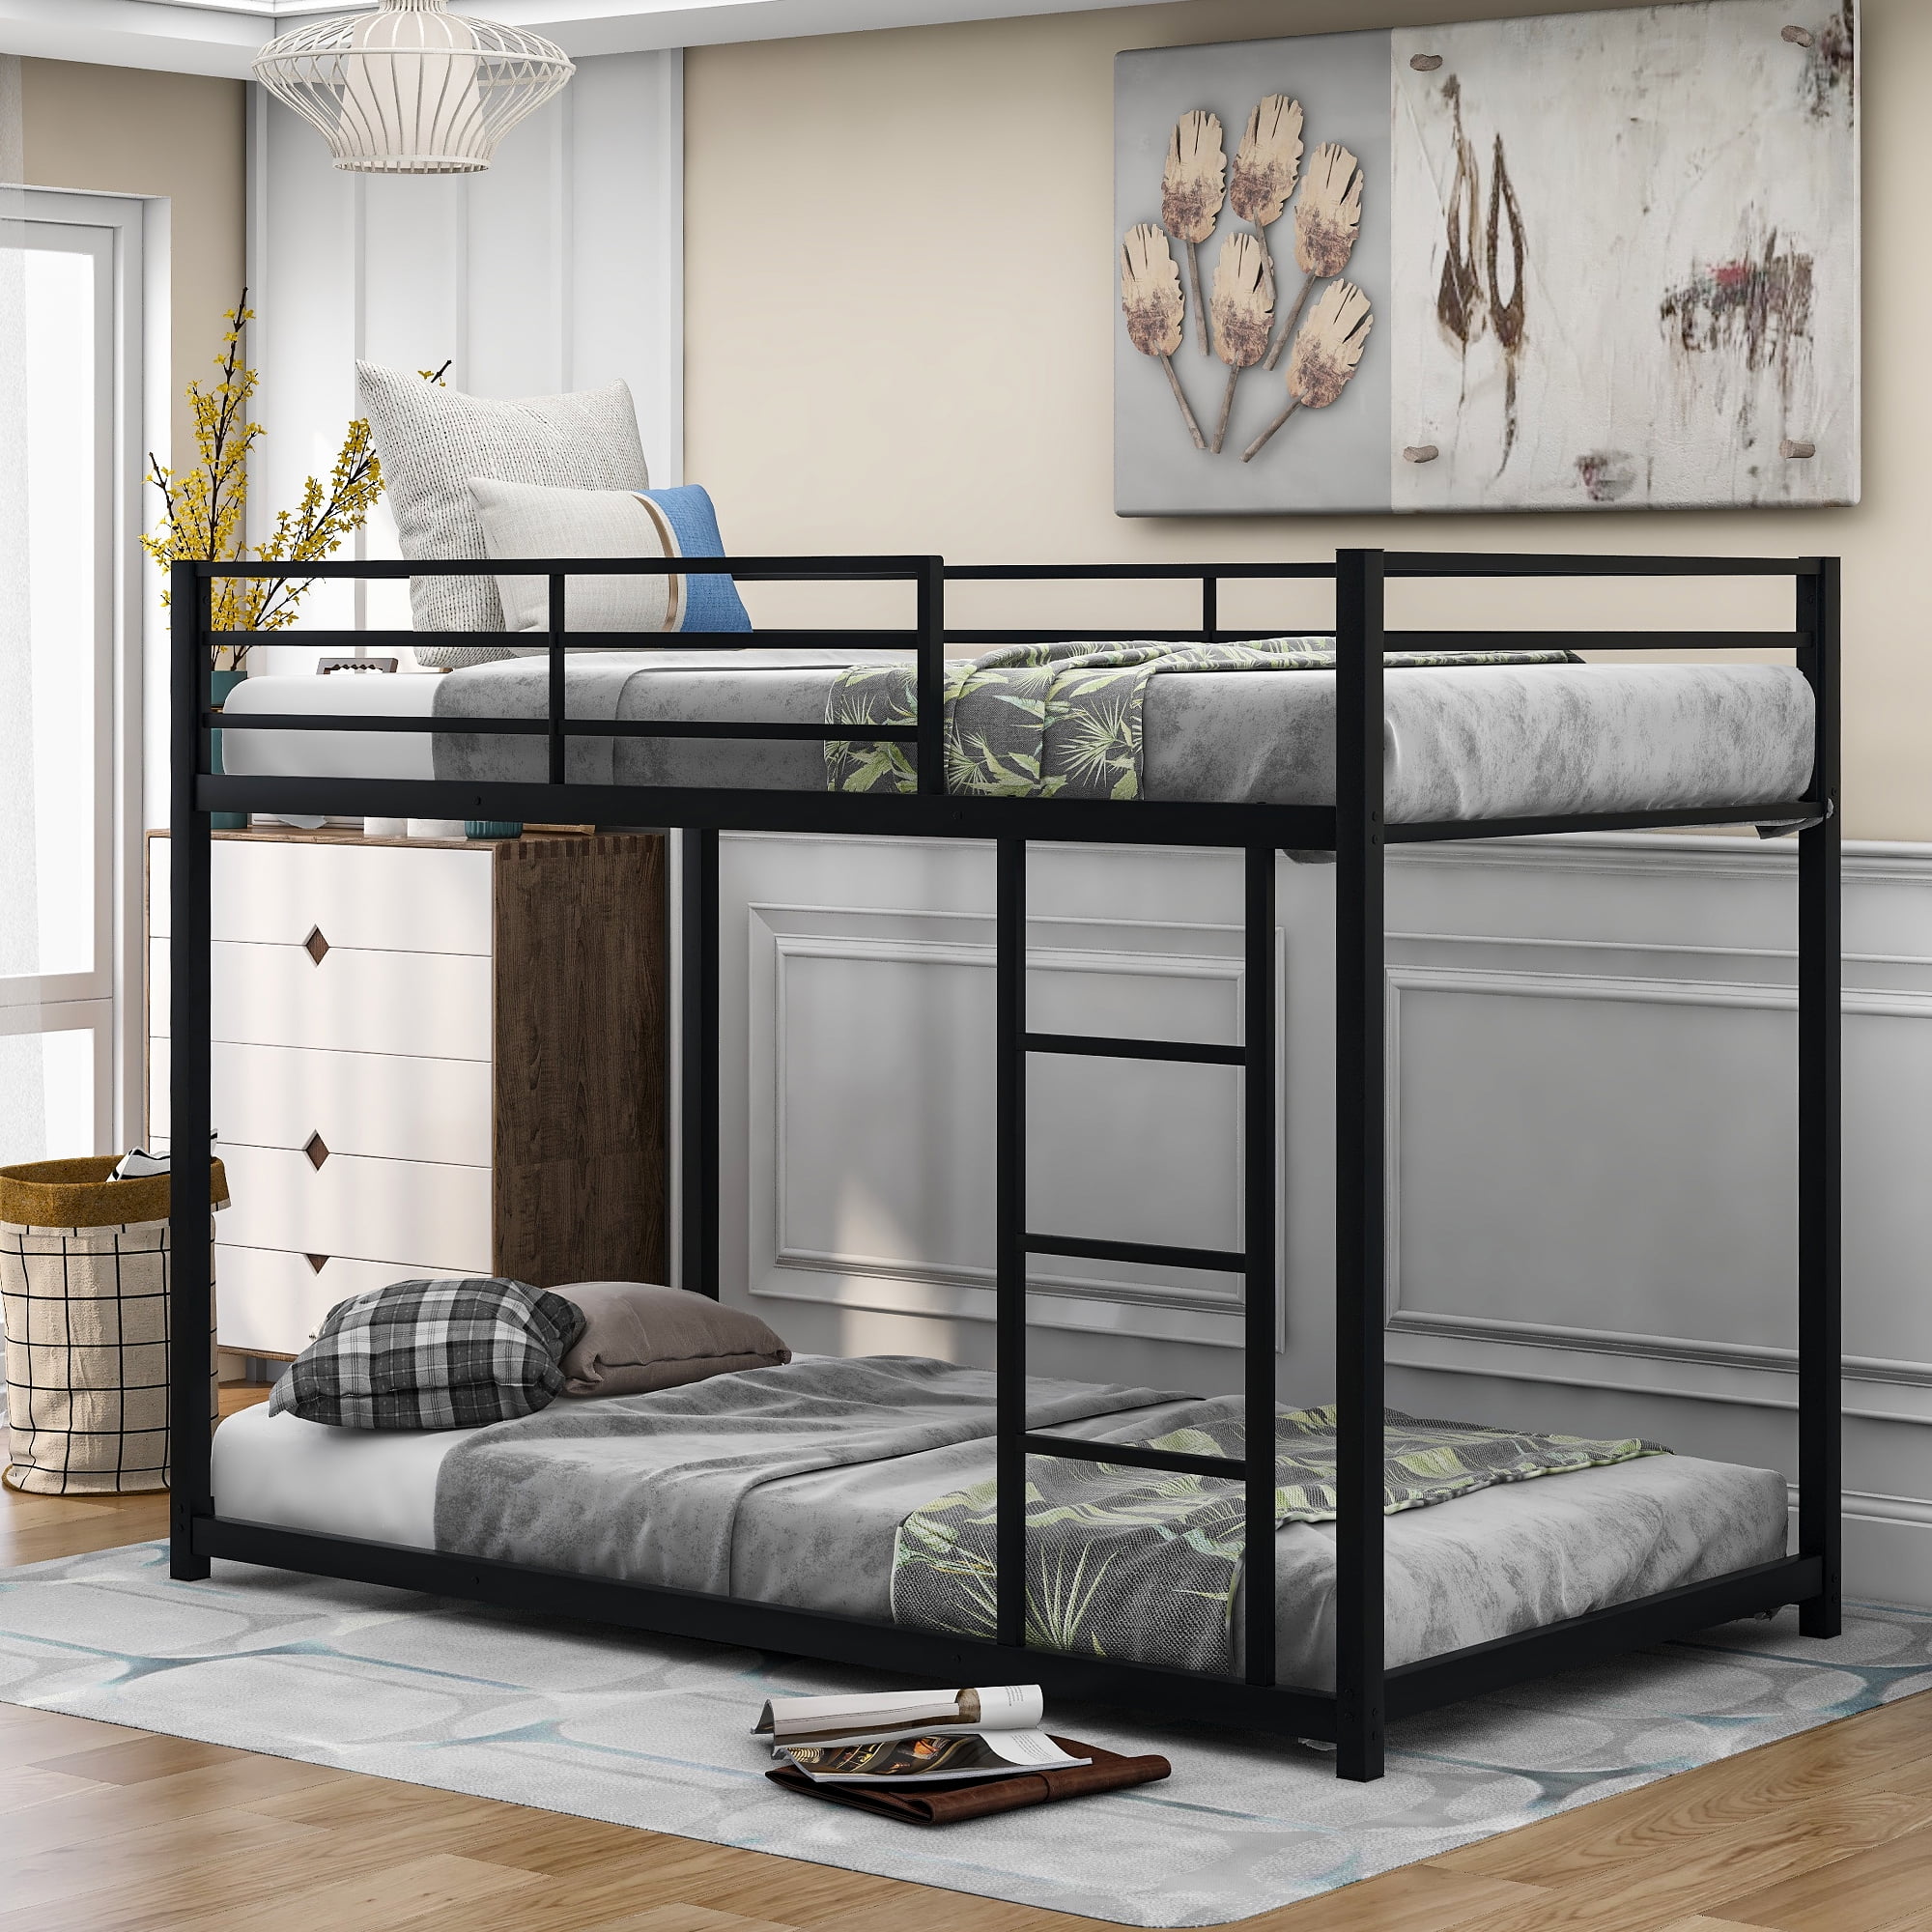 Euroco Twin Metal Low Bunk Bed With, Best Quality Metal Bunk Beds